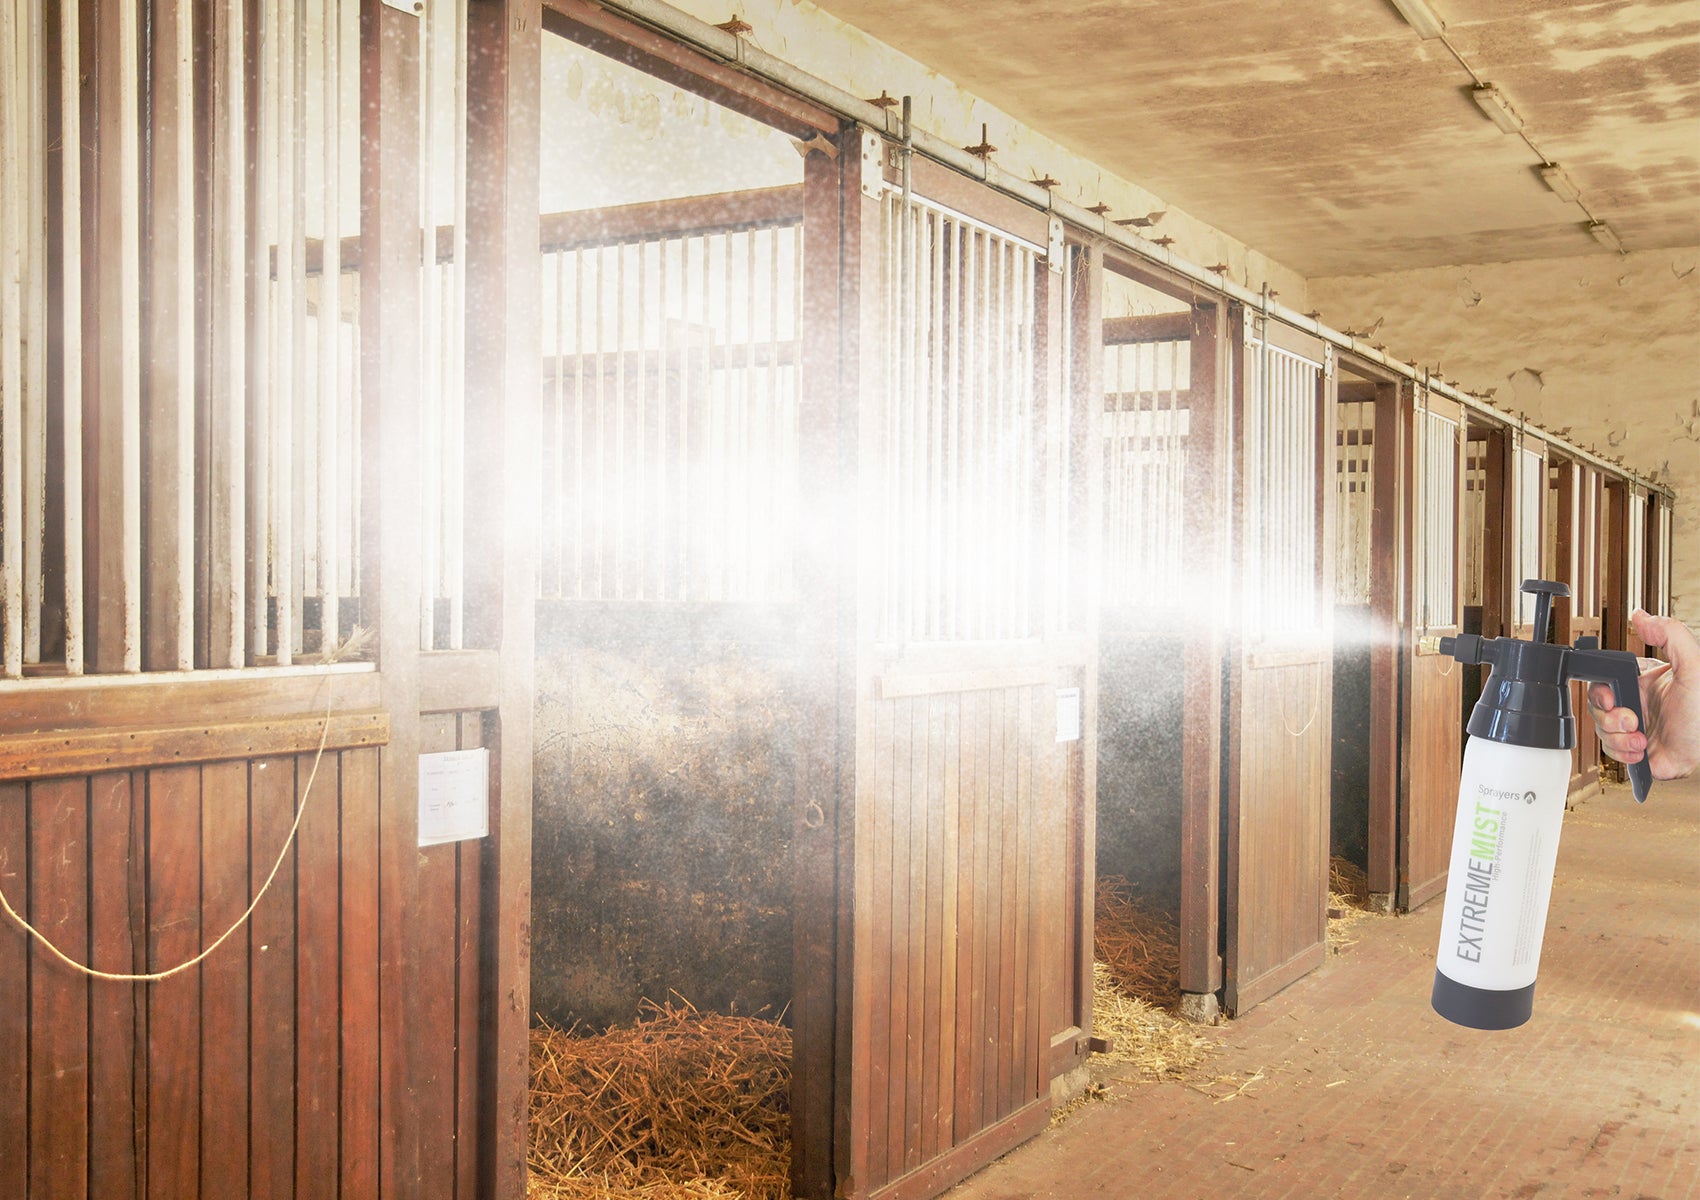 horse mister pump-up sprayer misting a horse stable